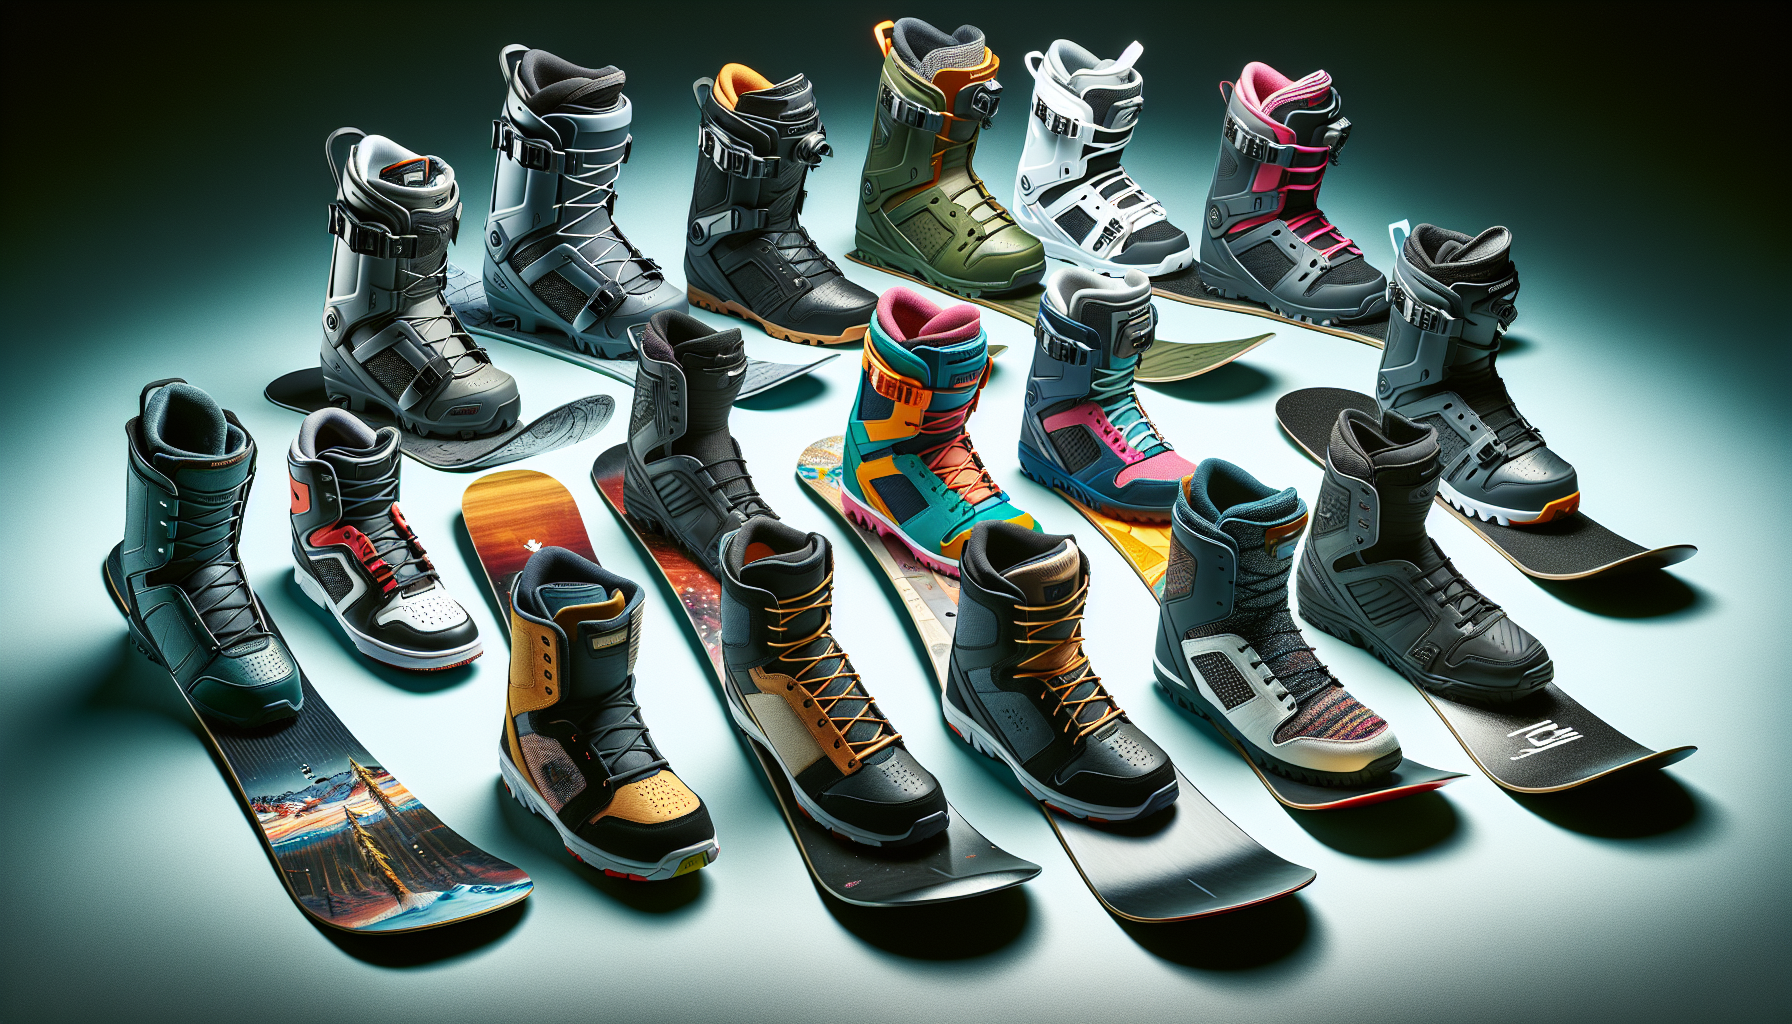 Snowboard boots for different riding styles